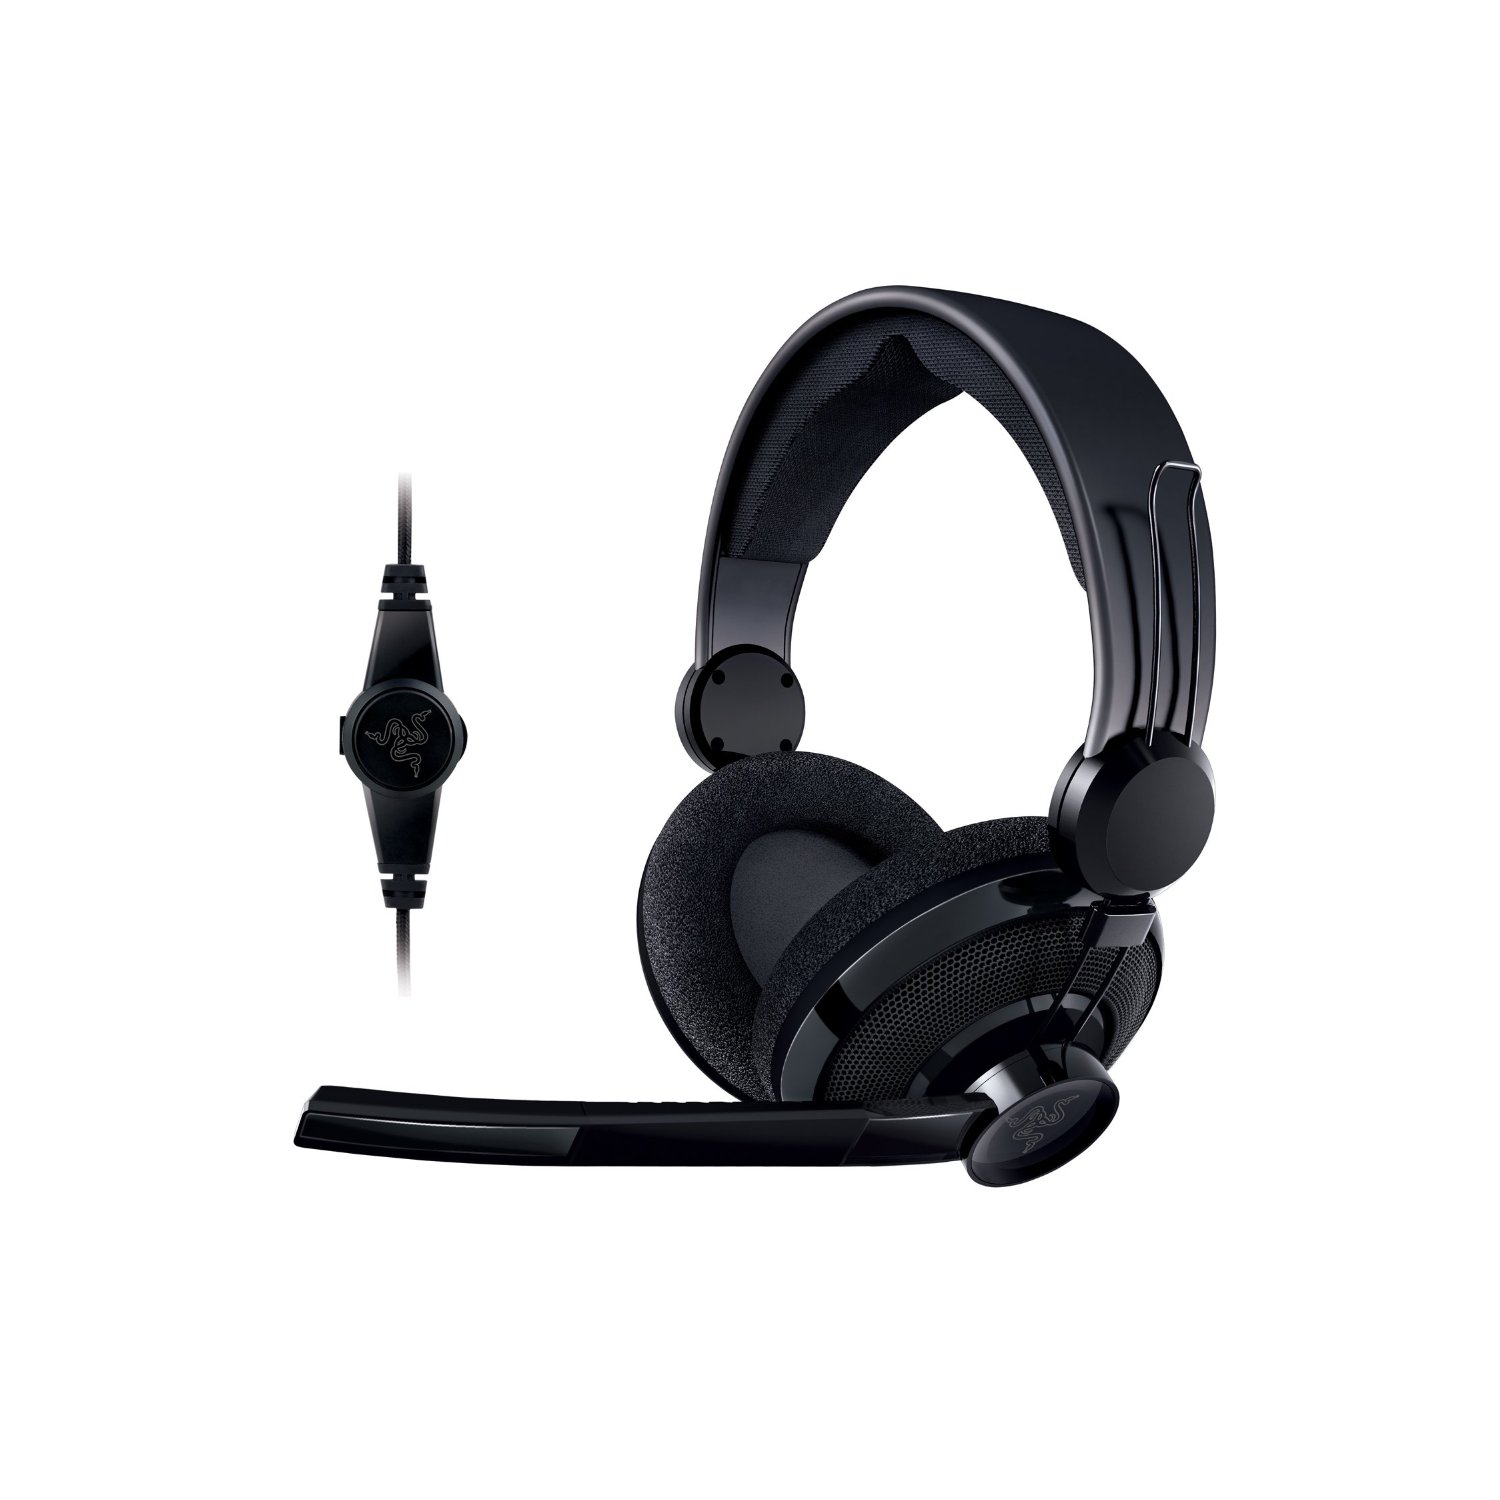 http://thetechjournal.com/wp-content/uploads/images/1111/1321790815-razer-carcharias-gaming-headset-1.jpg